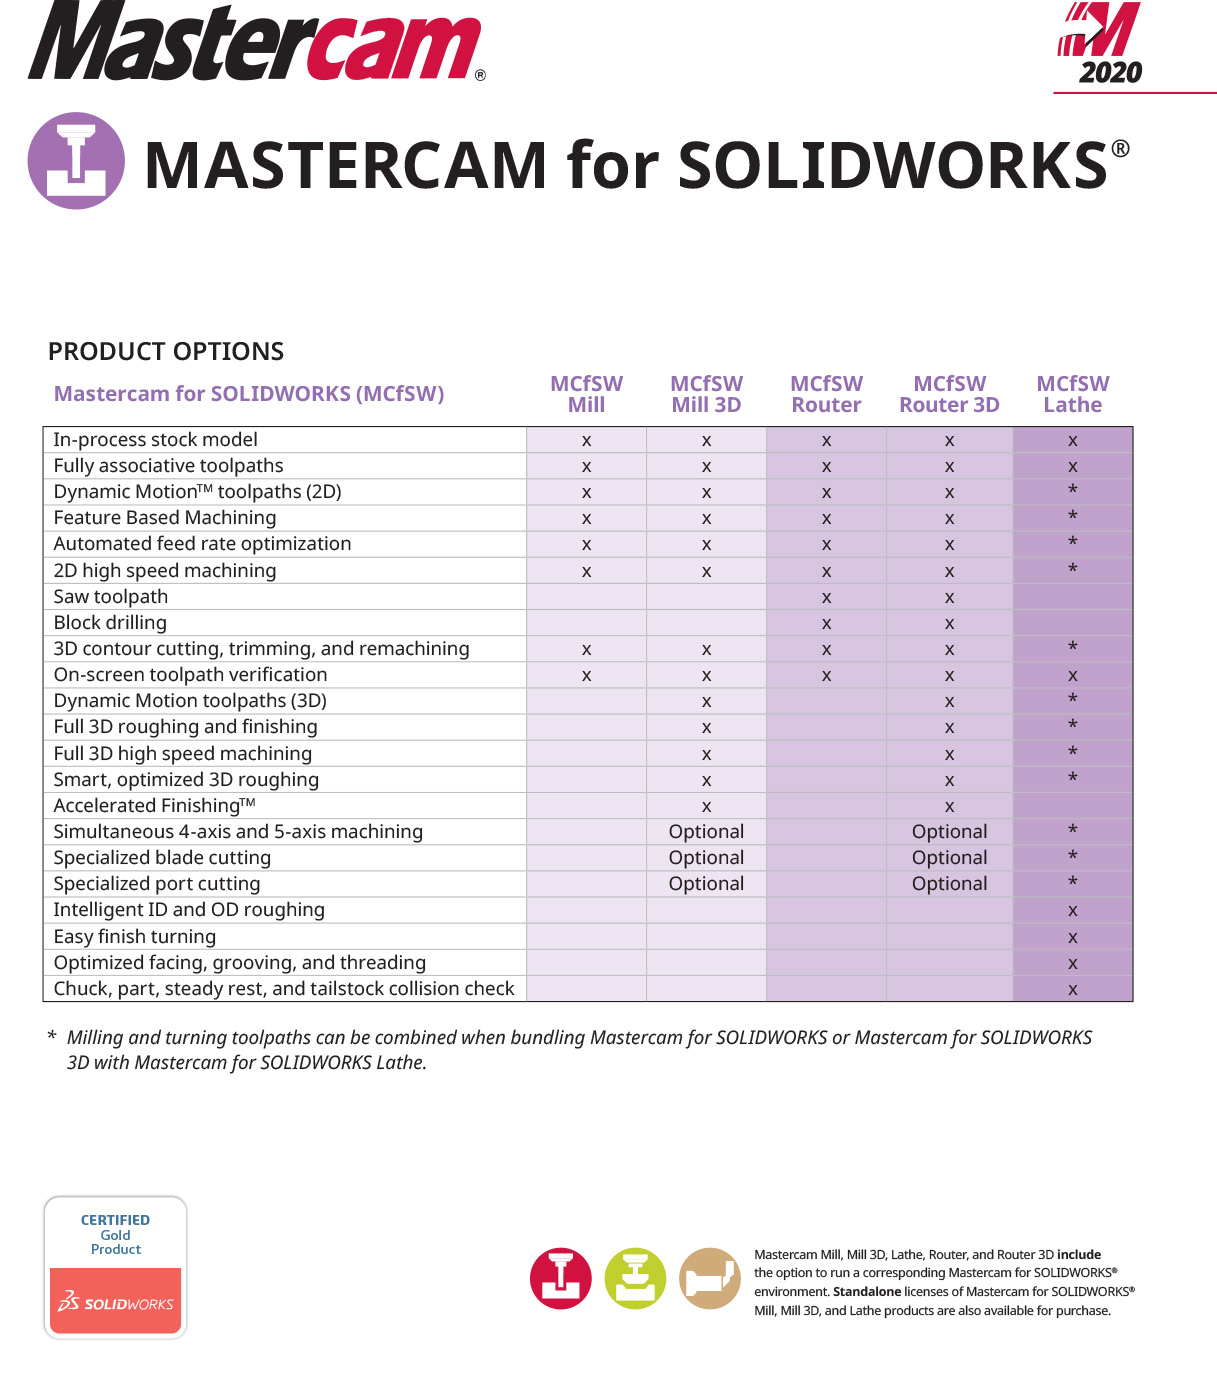 Mastercam for Solidworks 2020 Product Options